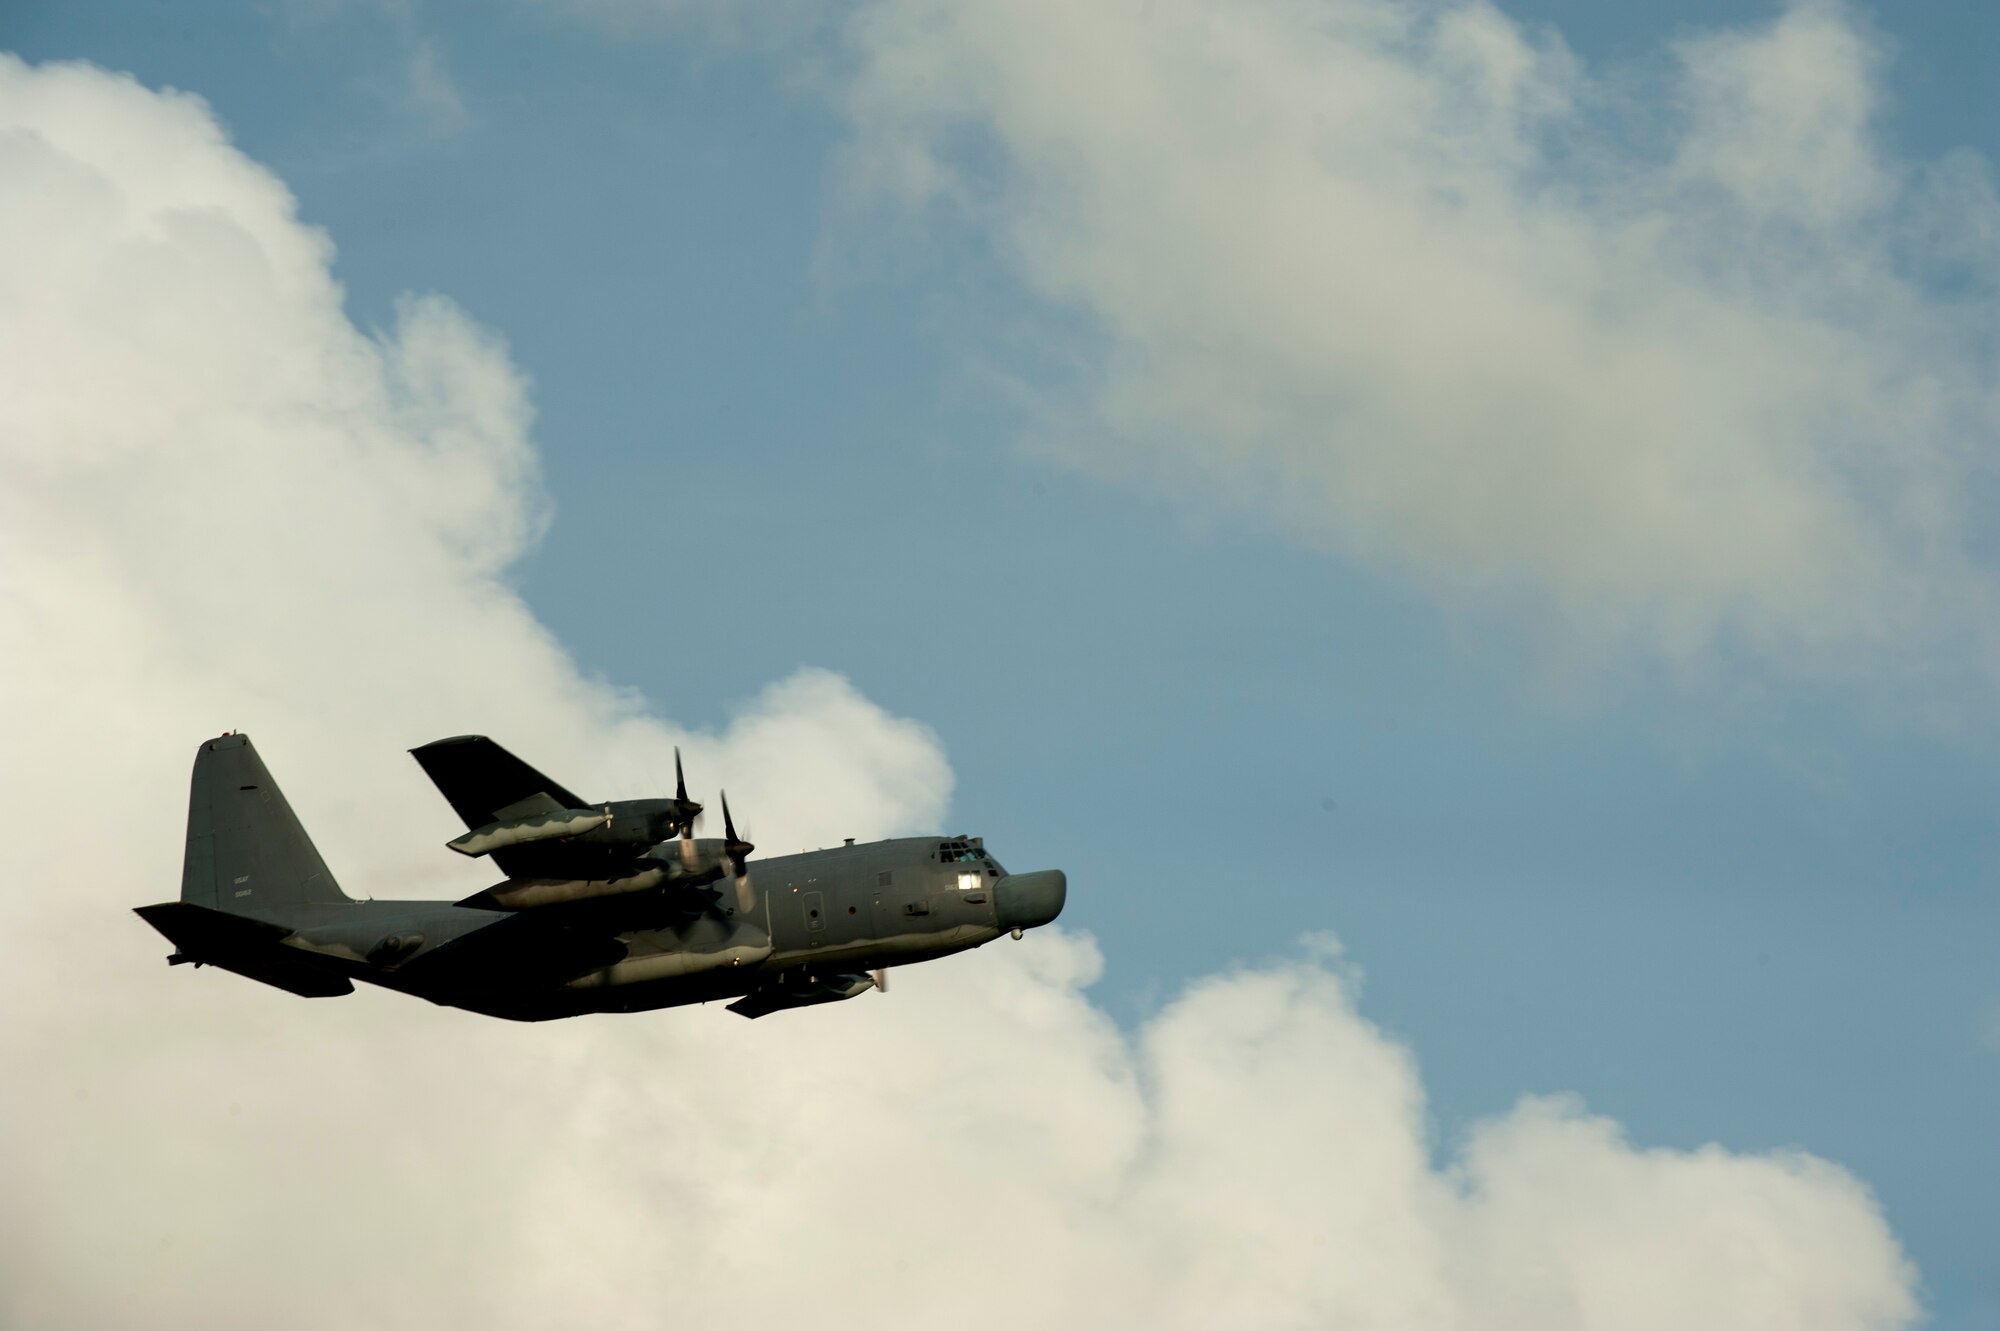 A U.S. Air Force MC-130H Combat Talon II from the 1st Special Operations Squadron flies over Kadena Air Base, Japan, shortly after takeoff May 14, 2015.  The 1st Special Operations Squadron is one of five squadrons that make up the 353rd Special Operations Group.  As the only Air Force special operations group in the Pacific, they are the focal point for Air Force special operations activities throughout the United States Pacific Command Theater.  (U.S. Air Force photo by Senior Airman Stephen G. Eigel)